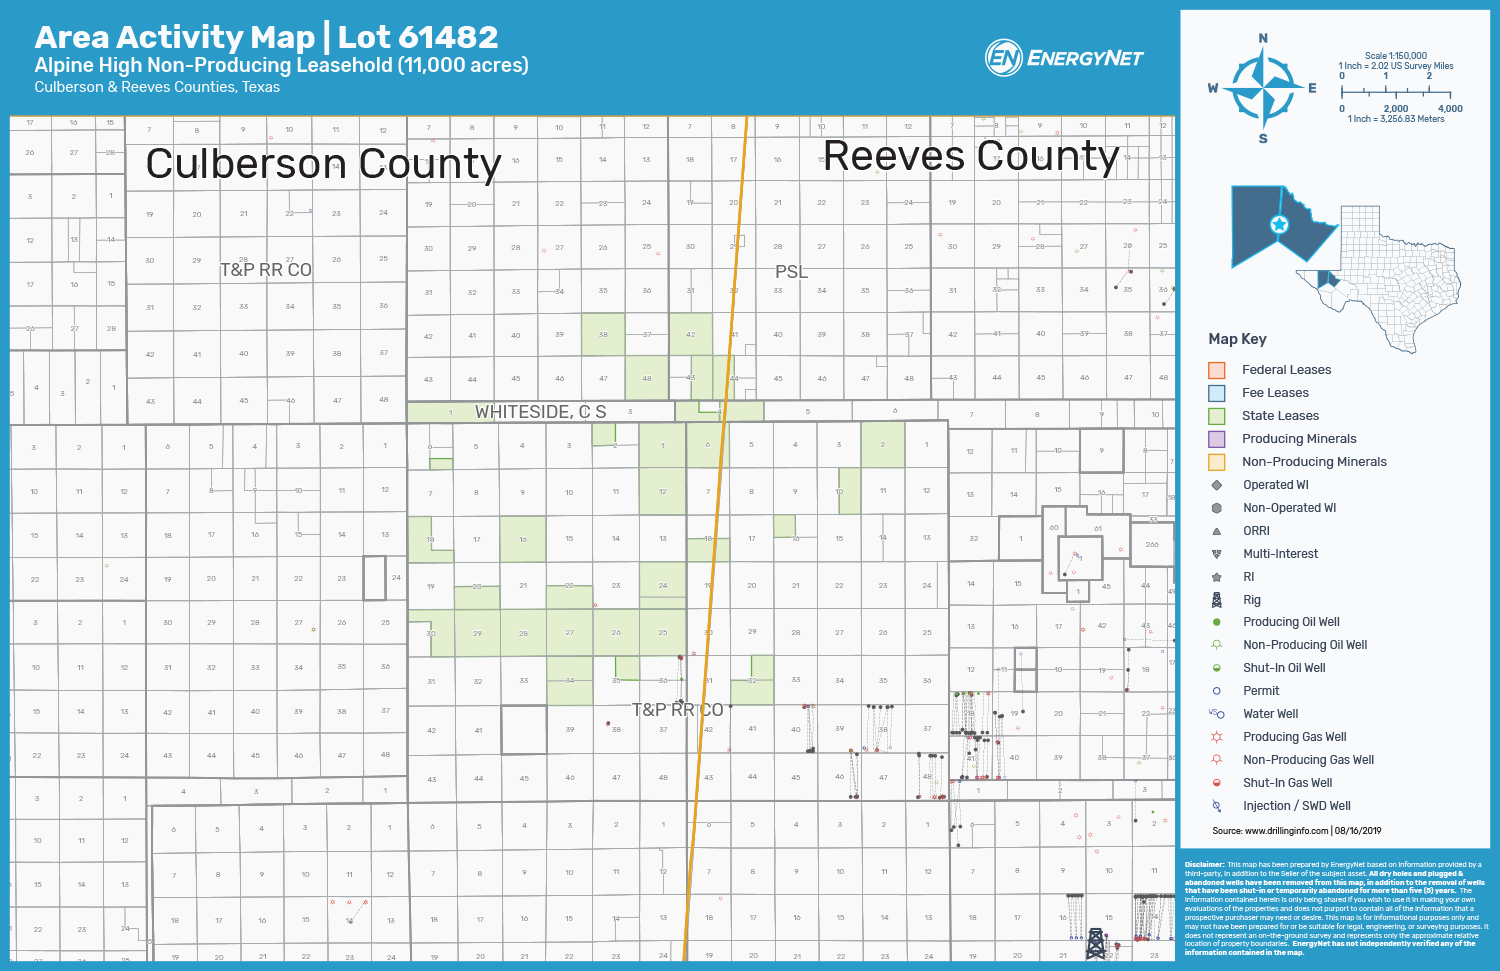 Carrizo Alpine High Leasehold Permian Basin Asset Map Culberson and Reeves counties, Texas (Source: EnergyNet)